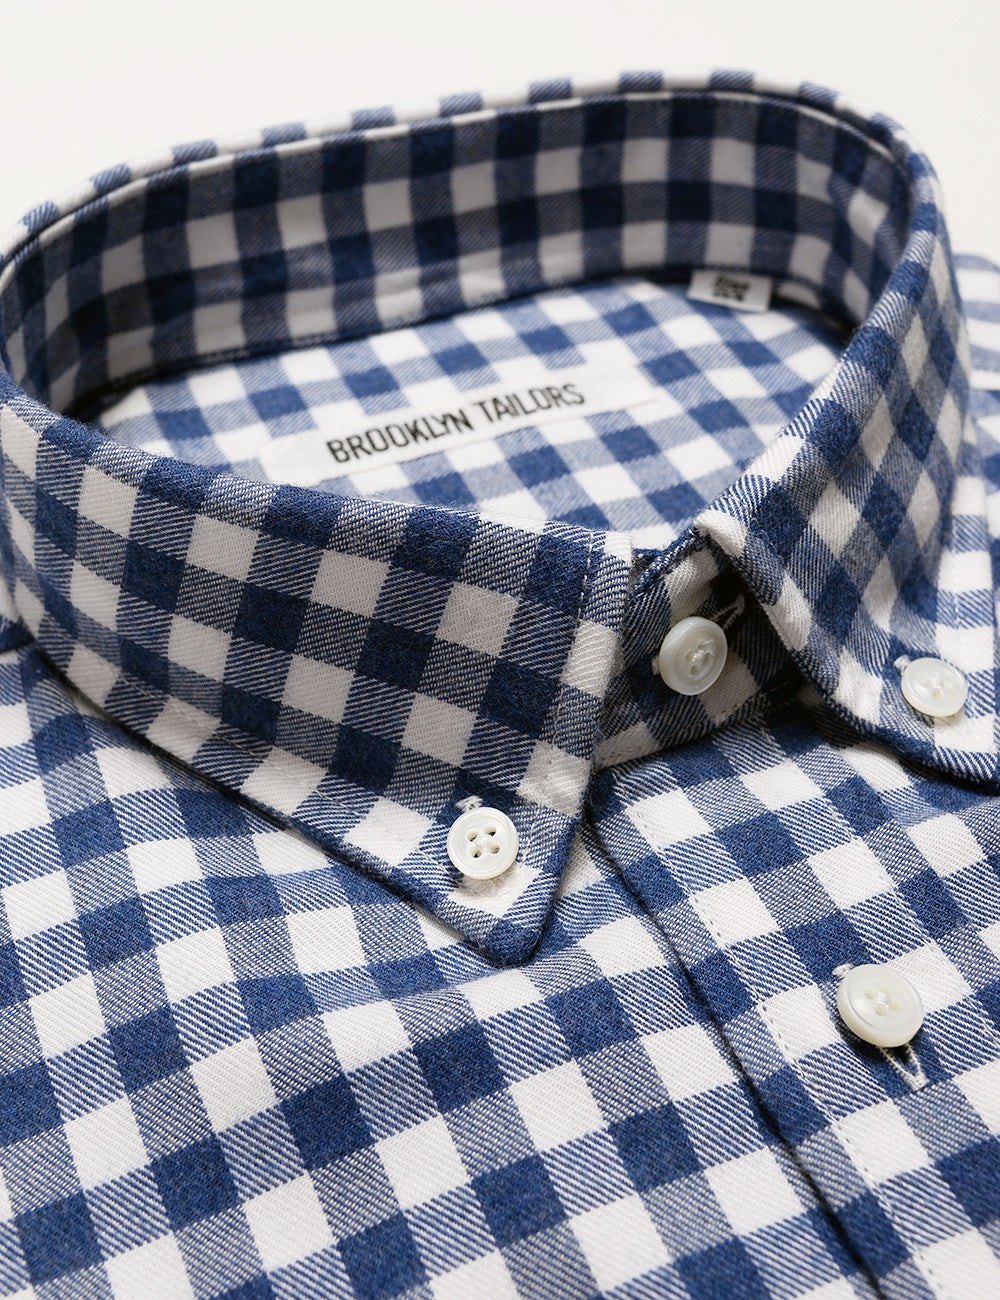 Detail of Brooklyn Tailors BKT10 Slim Casual Shirt in Brushed Cotton Gingham - Blue and White showing collar and fabric texture